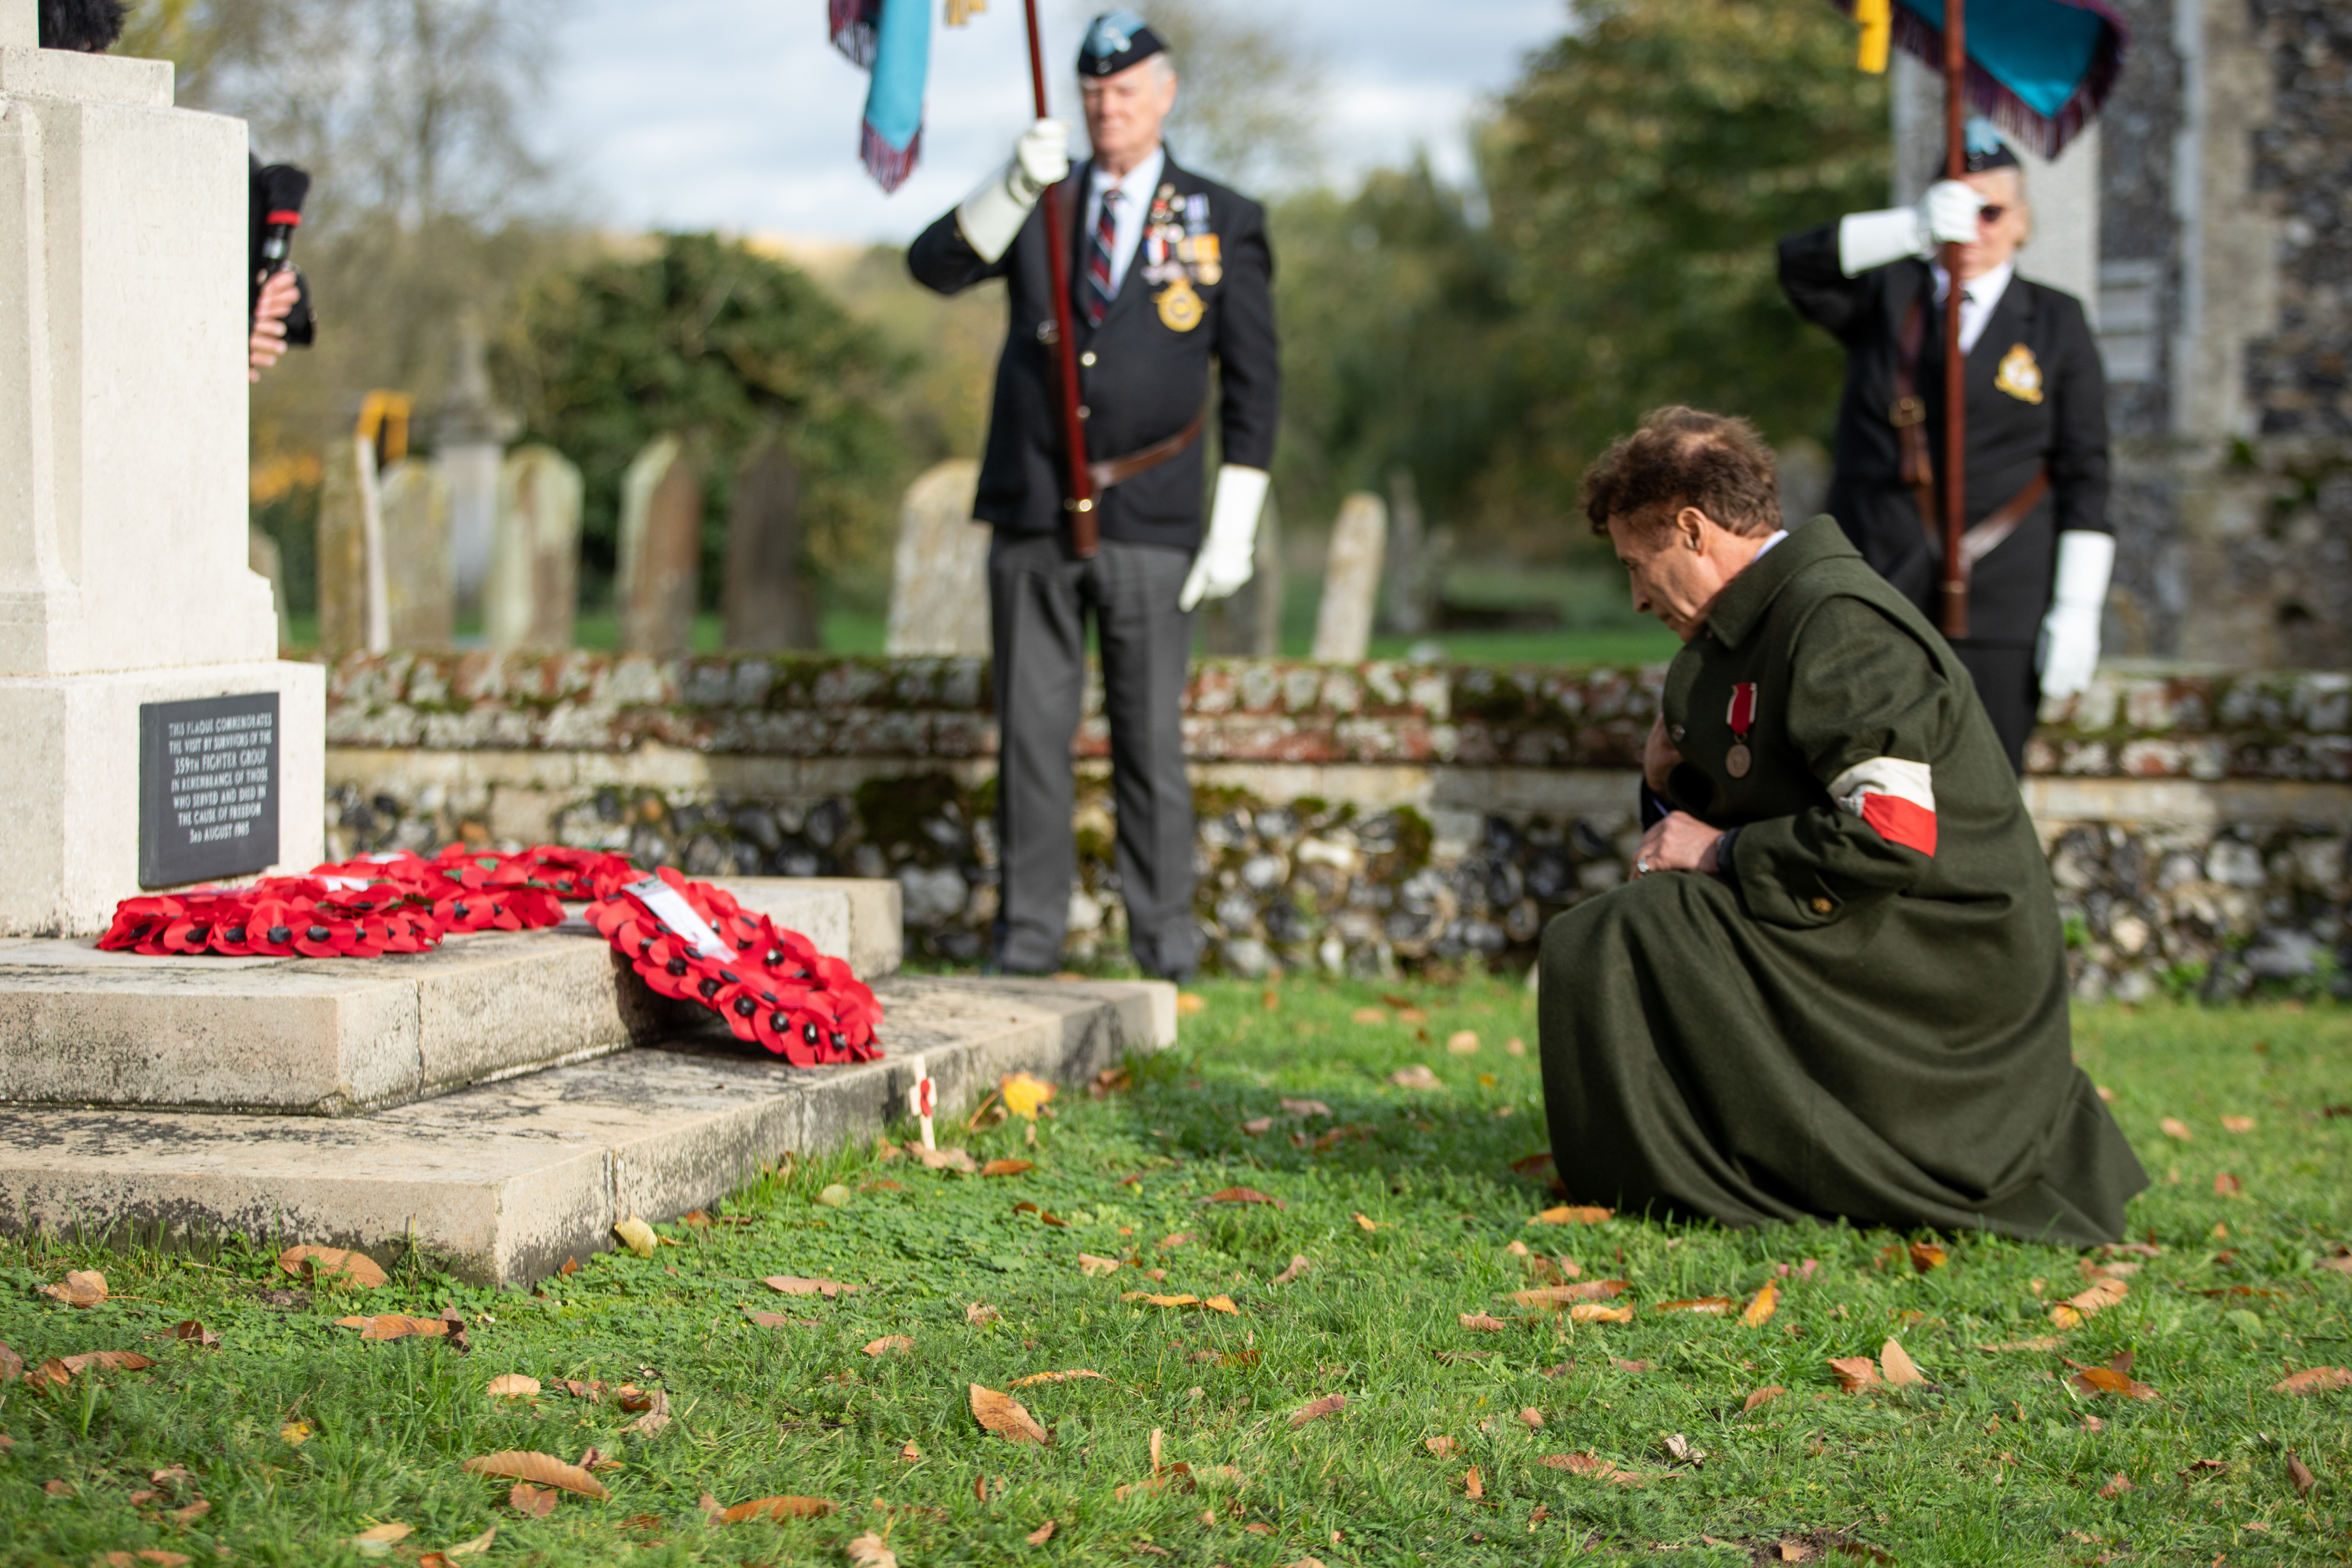 Image shows RAF aviator kneeling before memorial with poppy wreath.